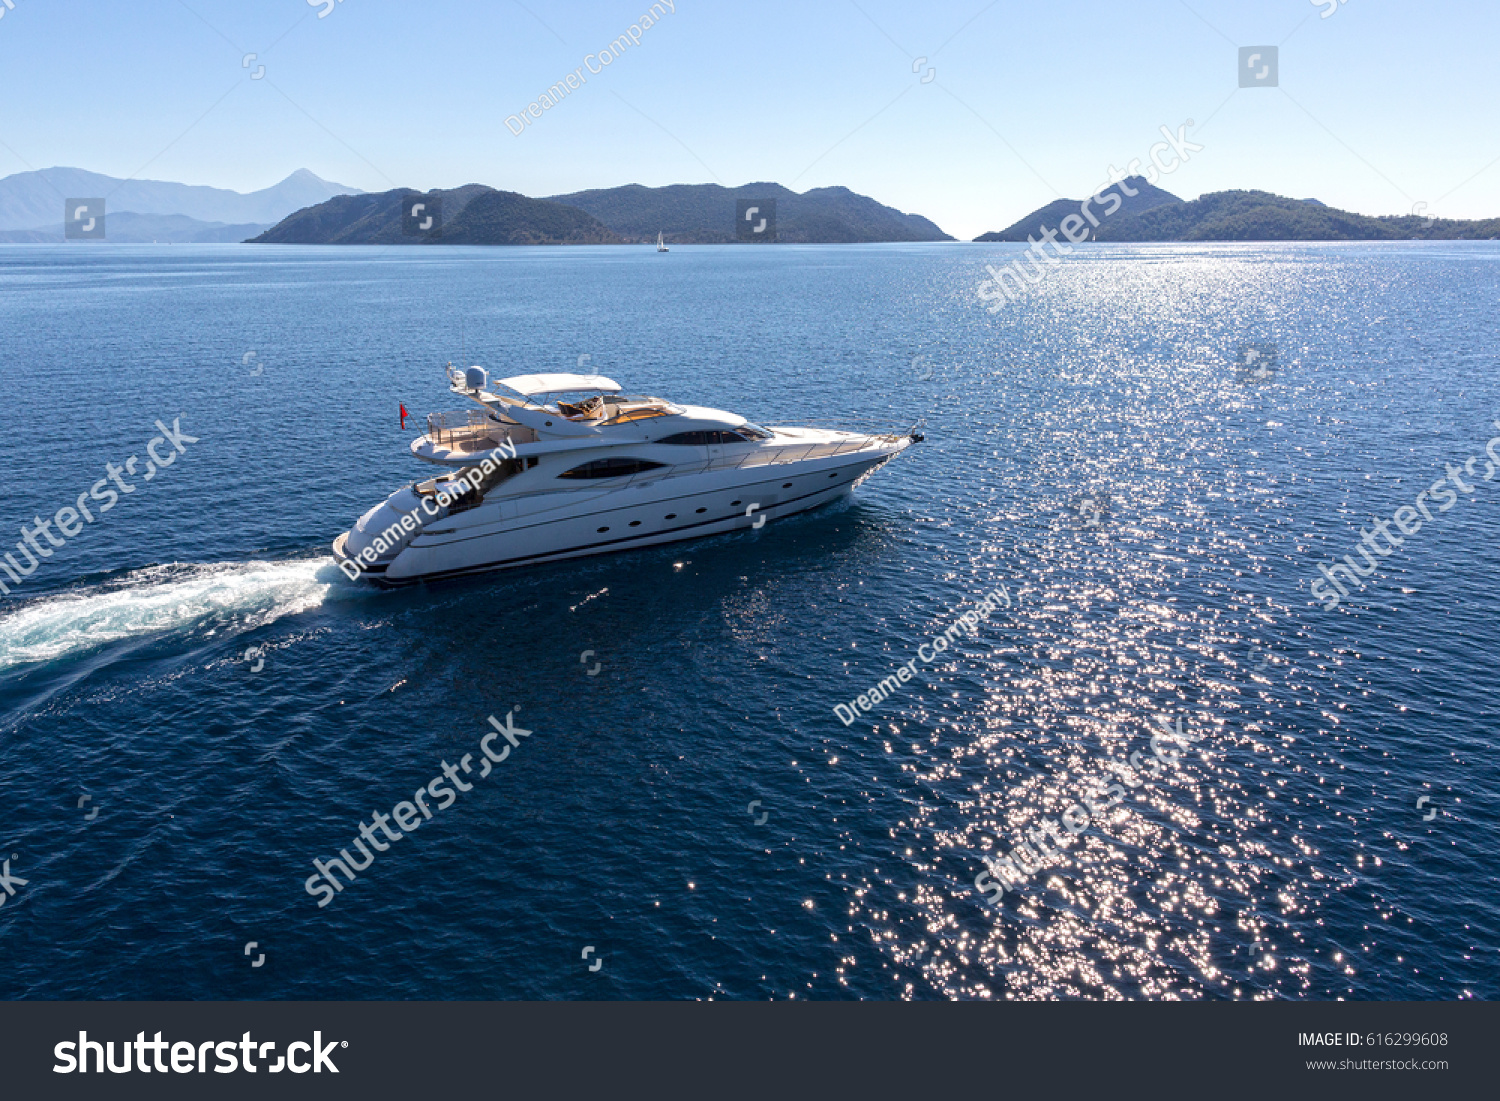 Luxury Yacht Aerial View #616299608